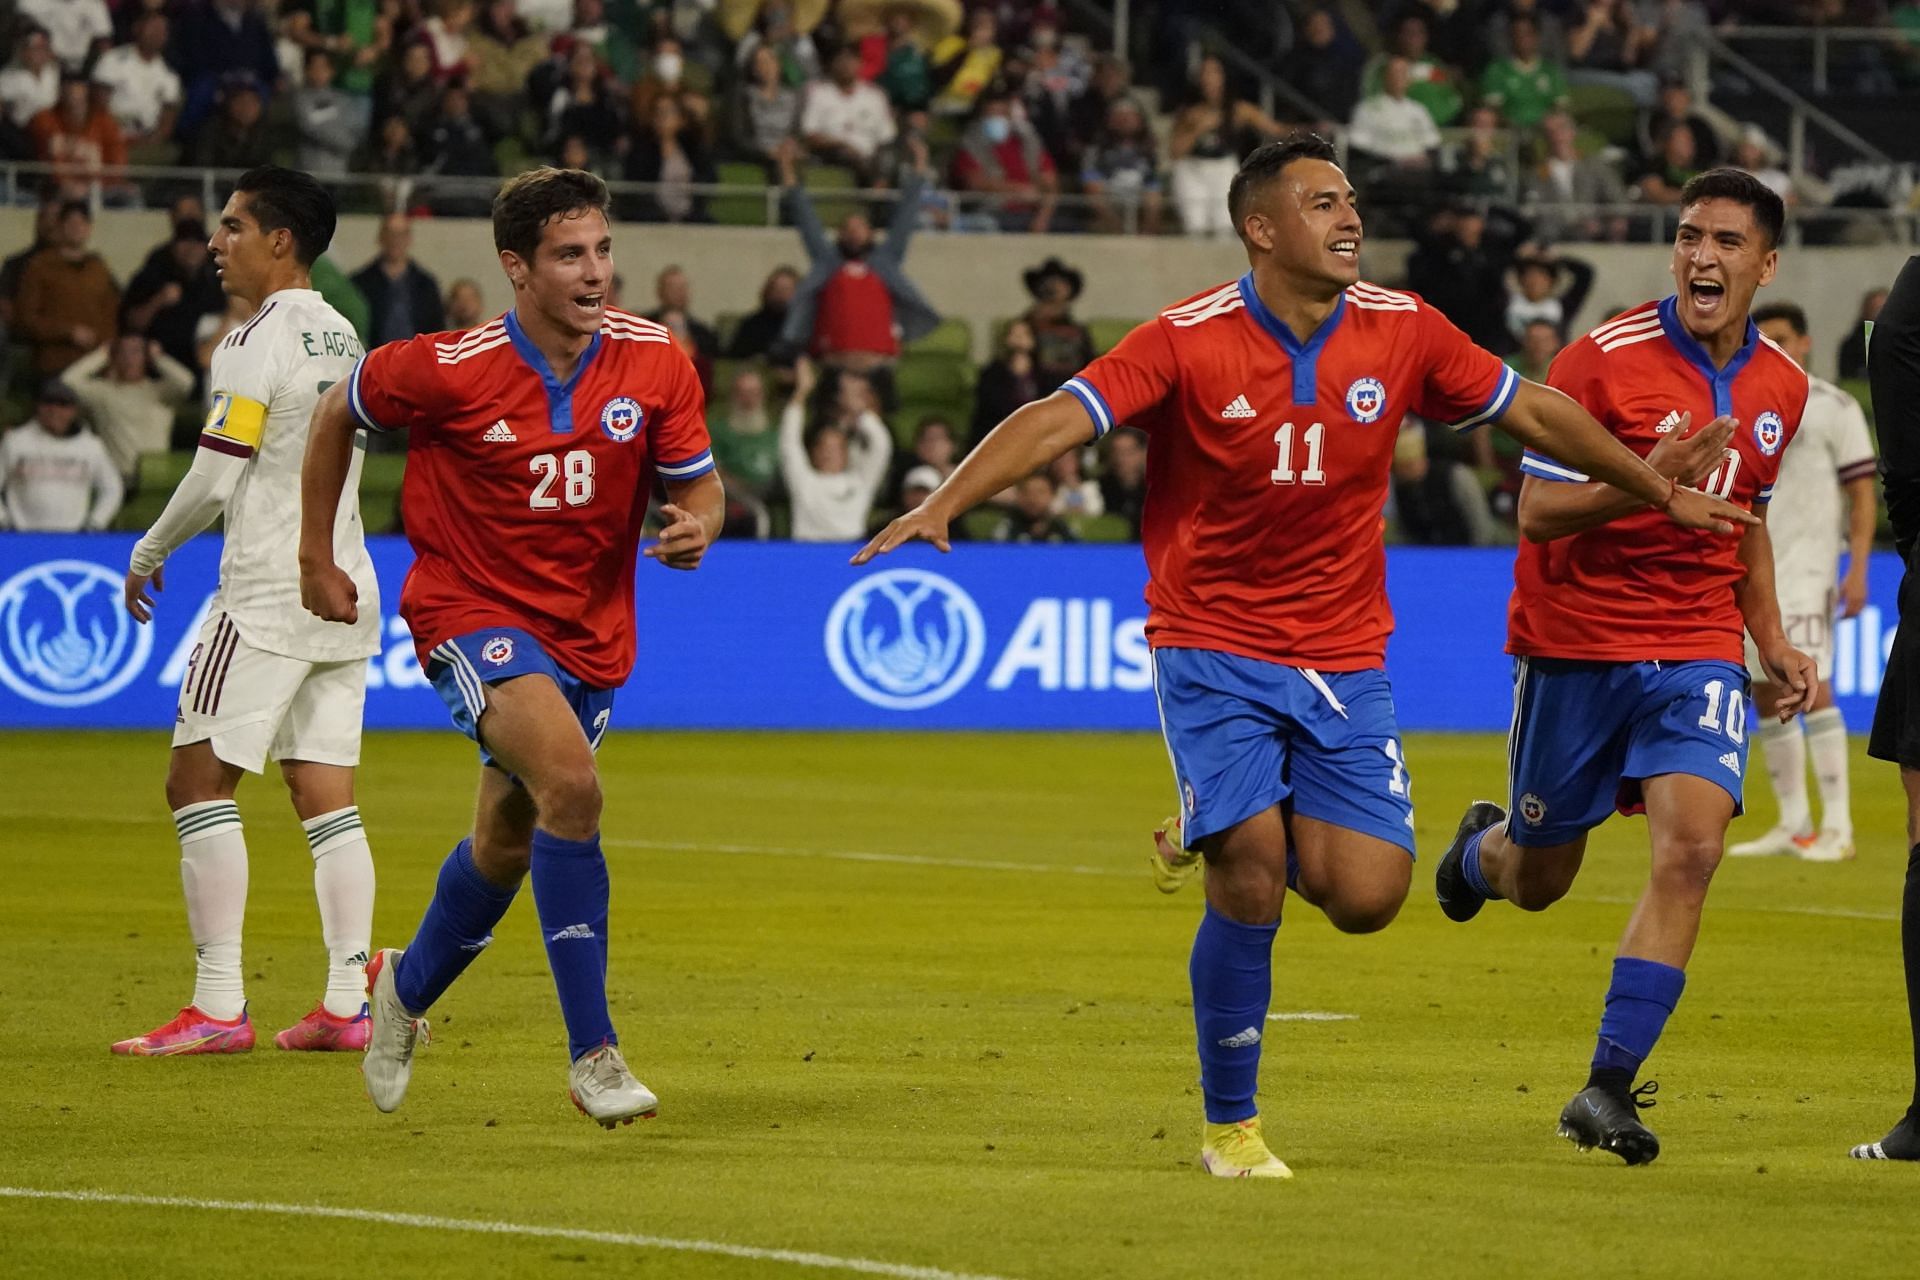 Chile will square off with El Salvador in a friendly on Saturday